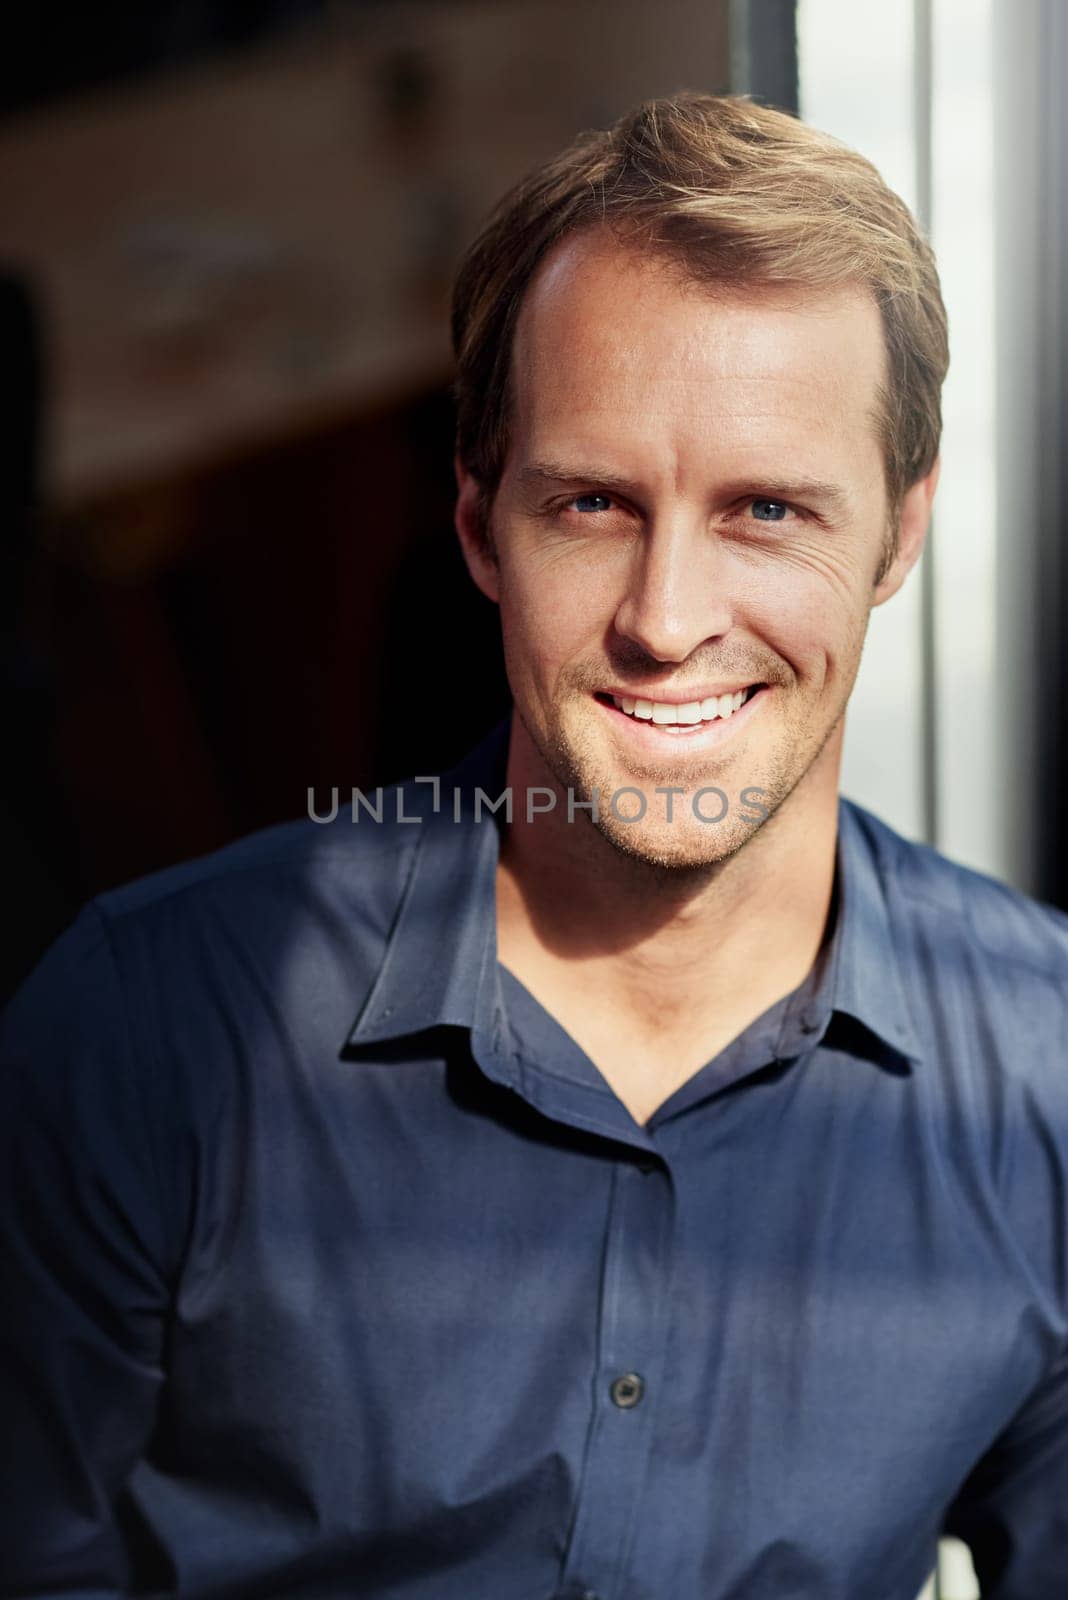 Mature business man, portrait and office by window with smile, confidence and pride at insurance company. Professional person, agent or happy employee in workplace for corporate career in Munich.